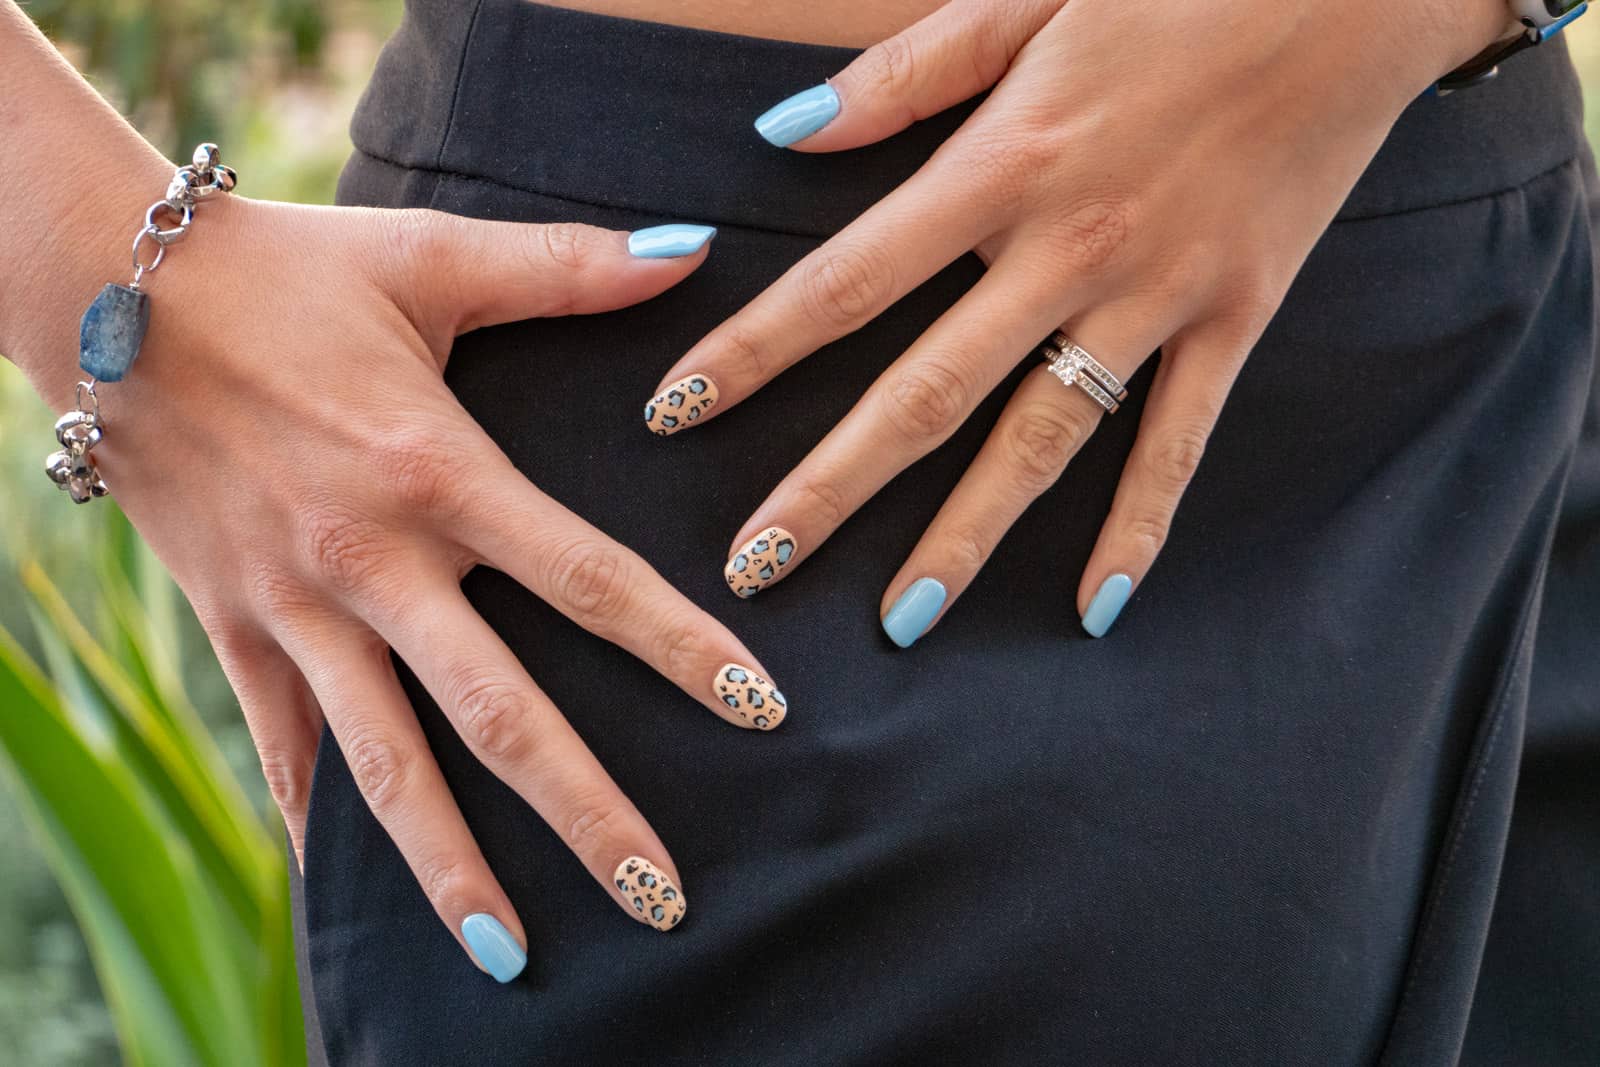 A close-up of a woman’s hands at her hip, with her fingers spread out. Her fingernails are painted blue with some of them having a leopard print pattern. She wears a silver chain with a blue stone on one wrist.